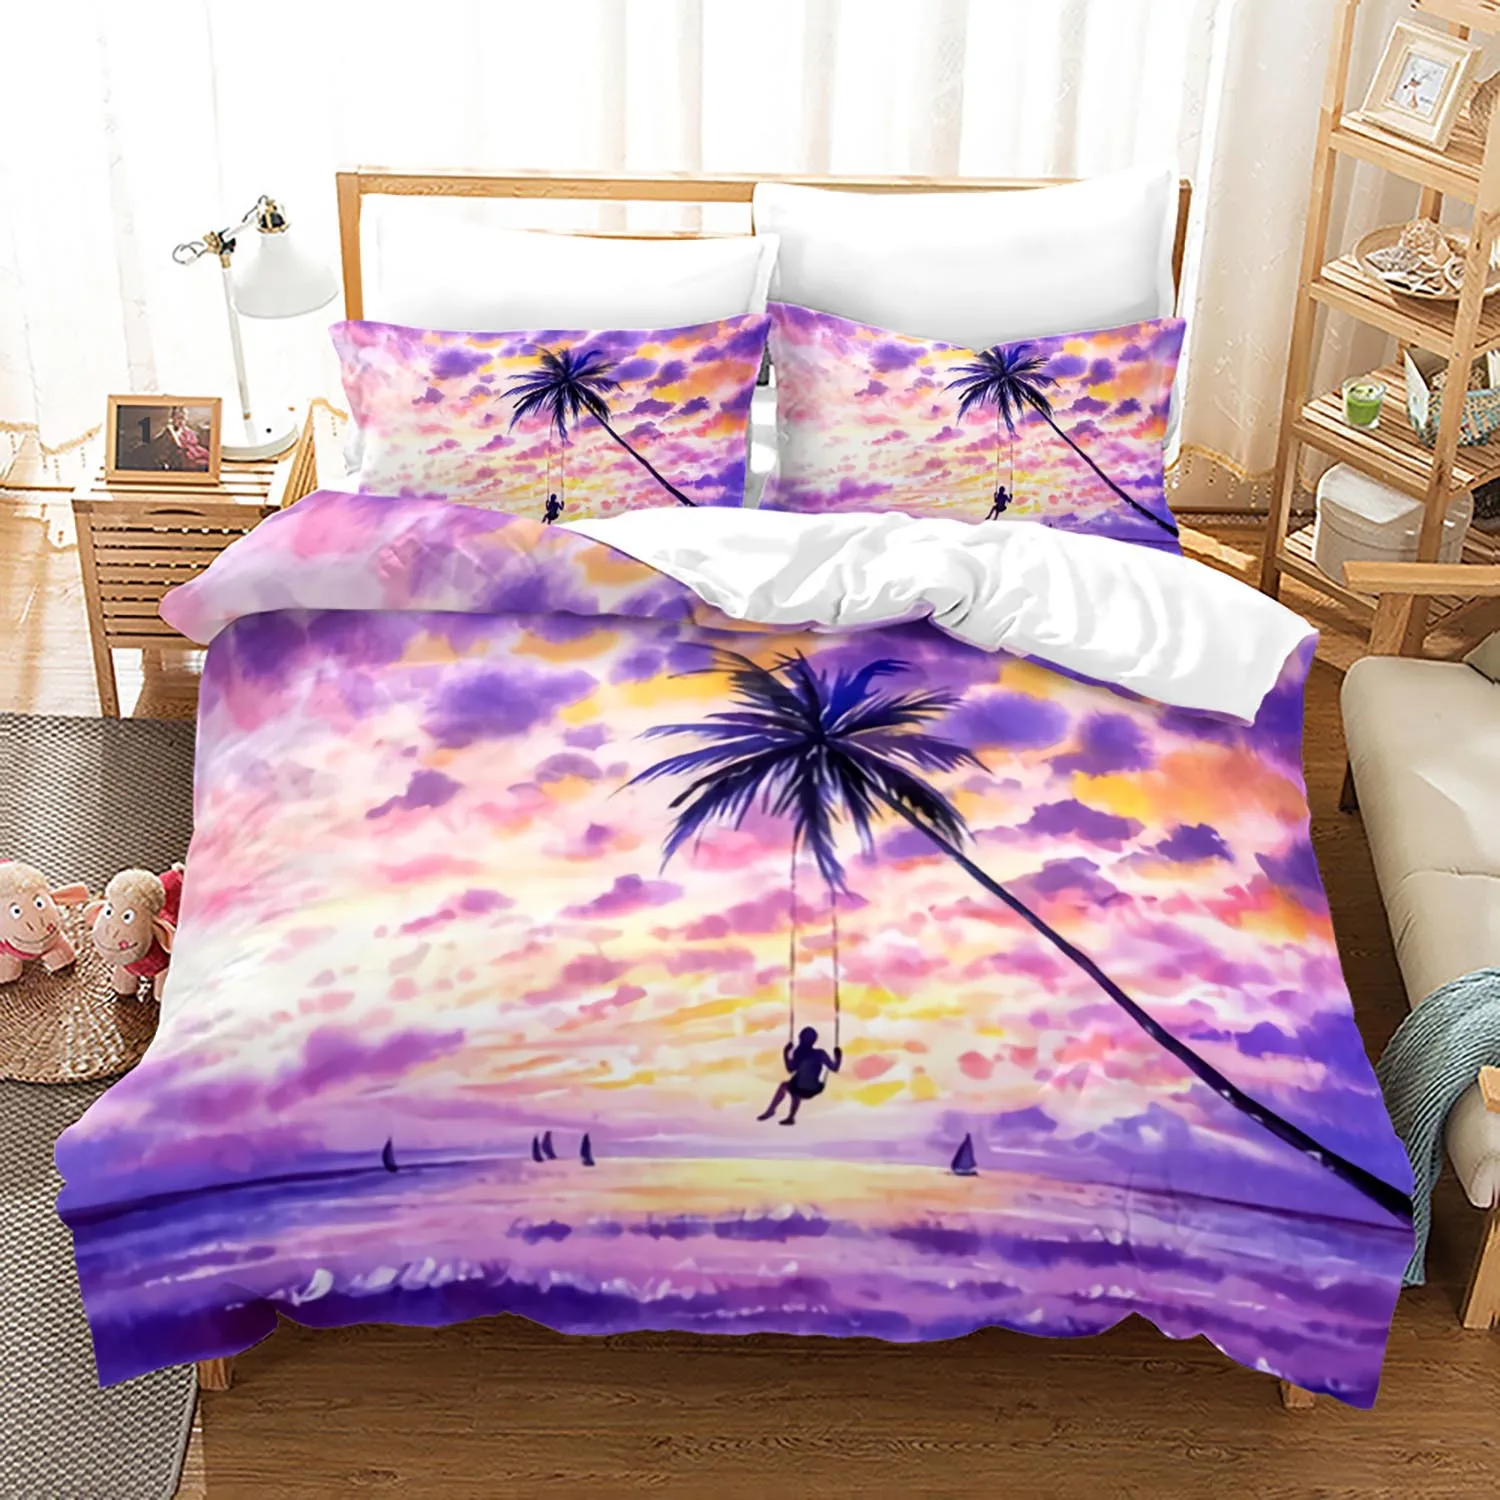 

Ocean Duvet Cover Set Queen/Full Size Tropical Island with The Palm Trees and Sea Beach Nature Theme Print Polyester Bedding Set